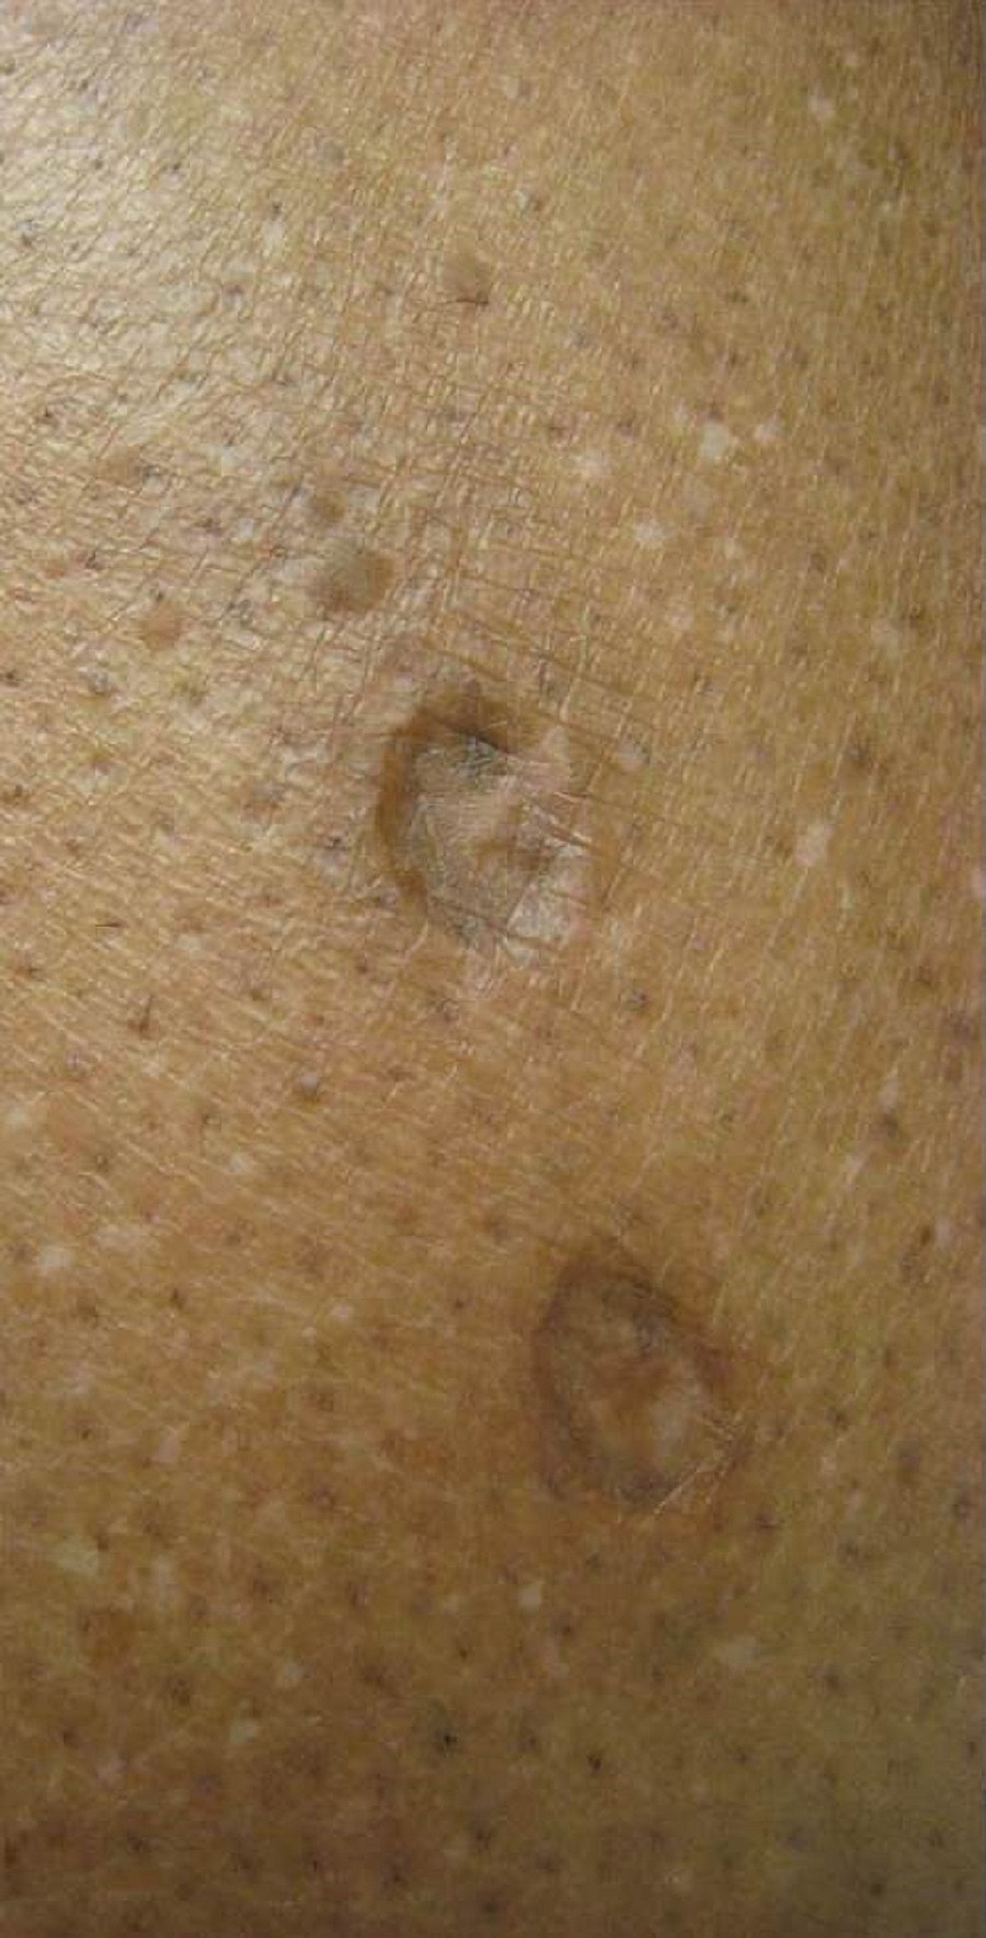 A-close-up-view-of-the-skin-popping-scars-with-atrophic,-hyperpigmented-papules